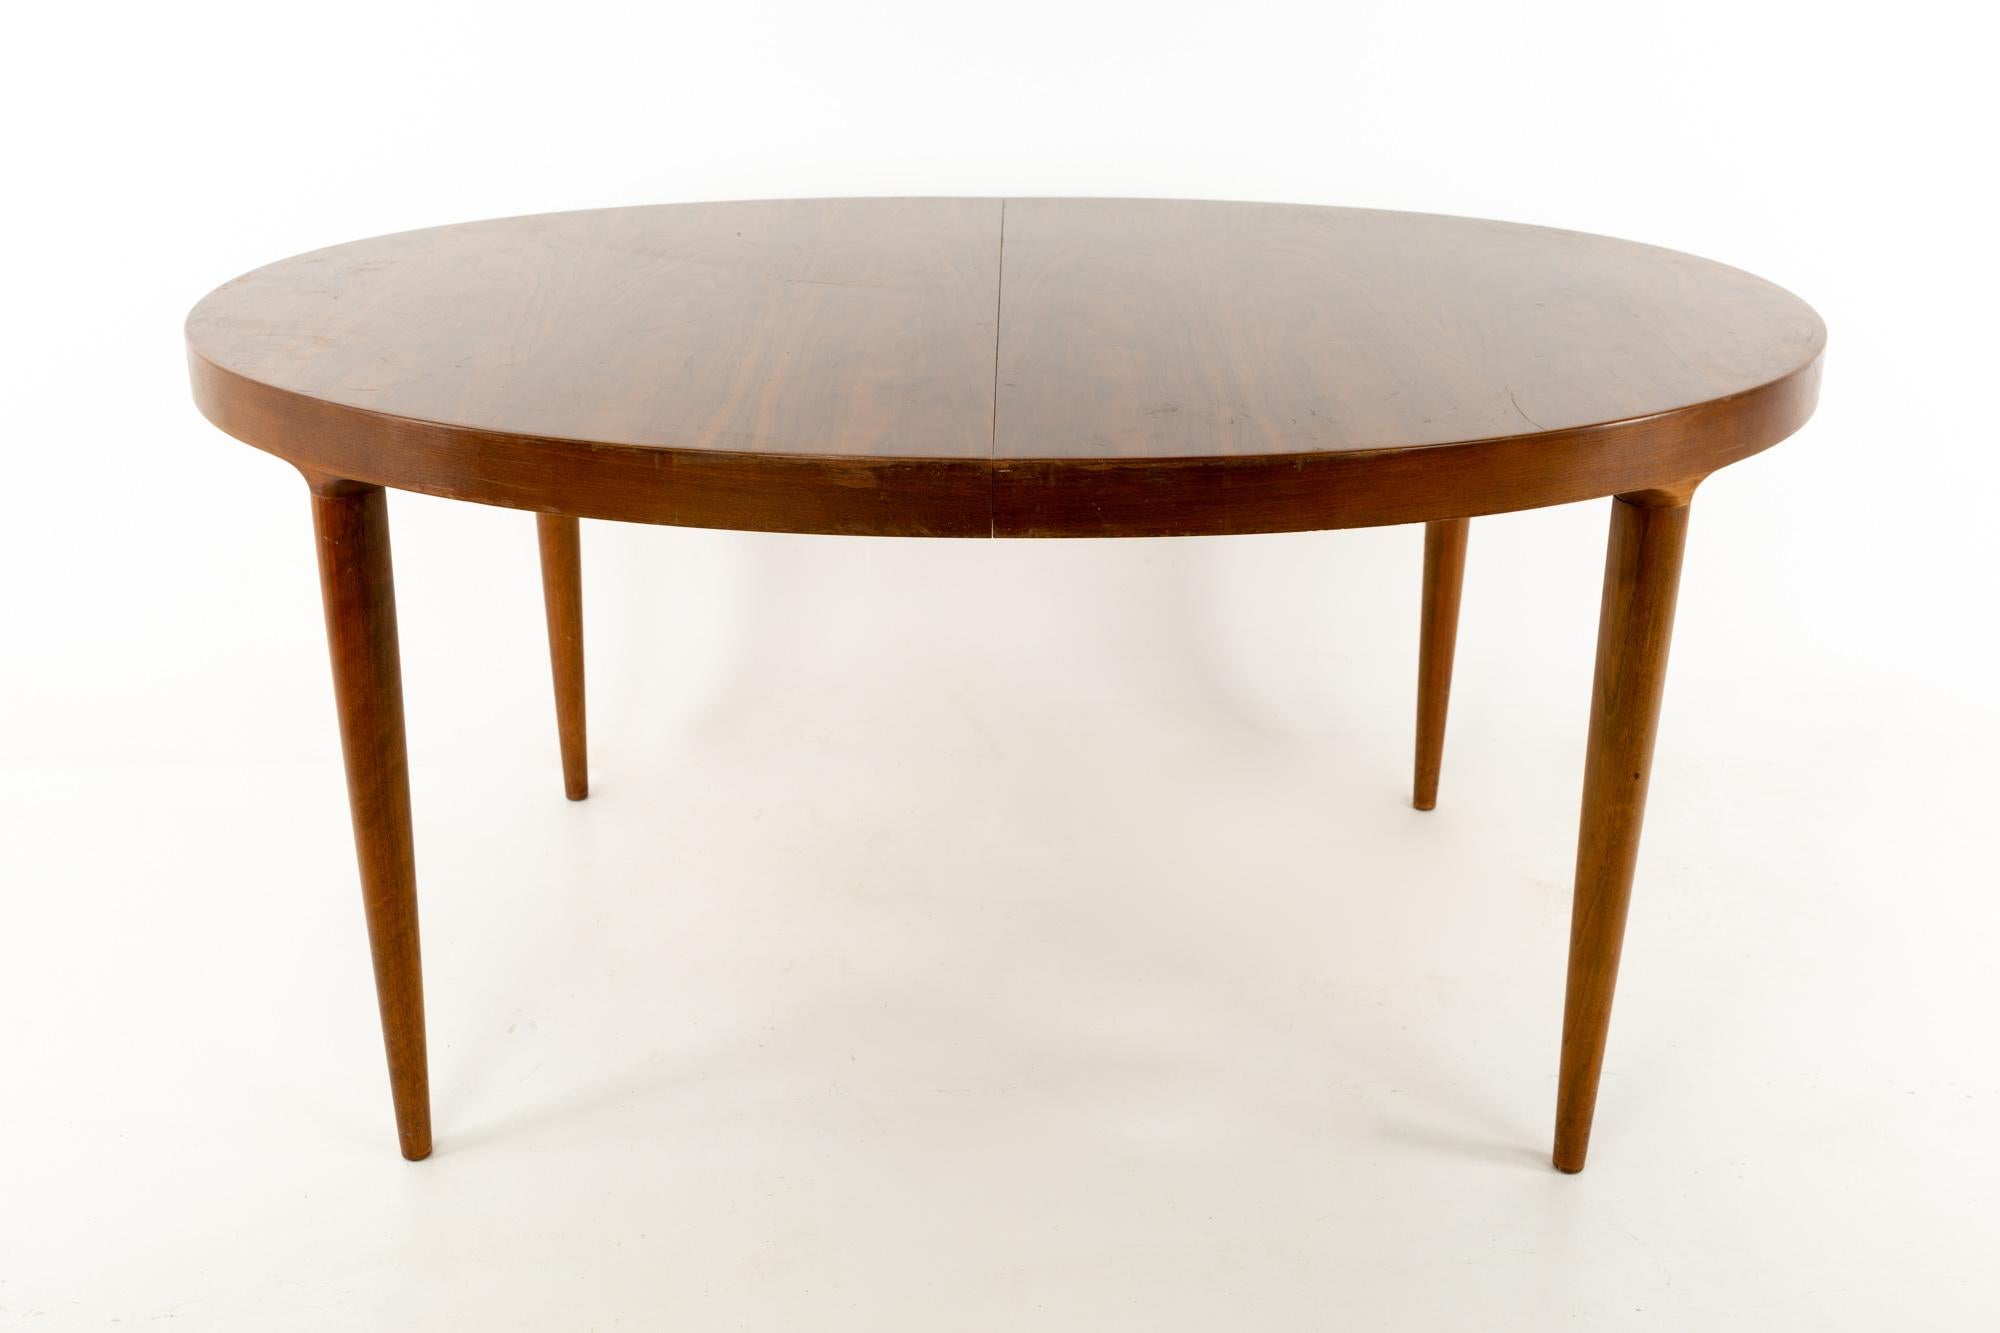 Moreddi midcentury Danish modern walnut oval dining table
This table is 59 wide x 43 deep x 28.5 inches high and each of the two leaves is 19.5 inches; for a total table width of 98 inches

Each piece of furniture is available in what we call